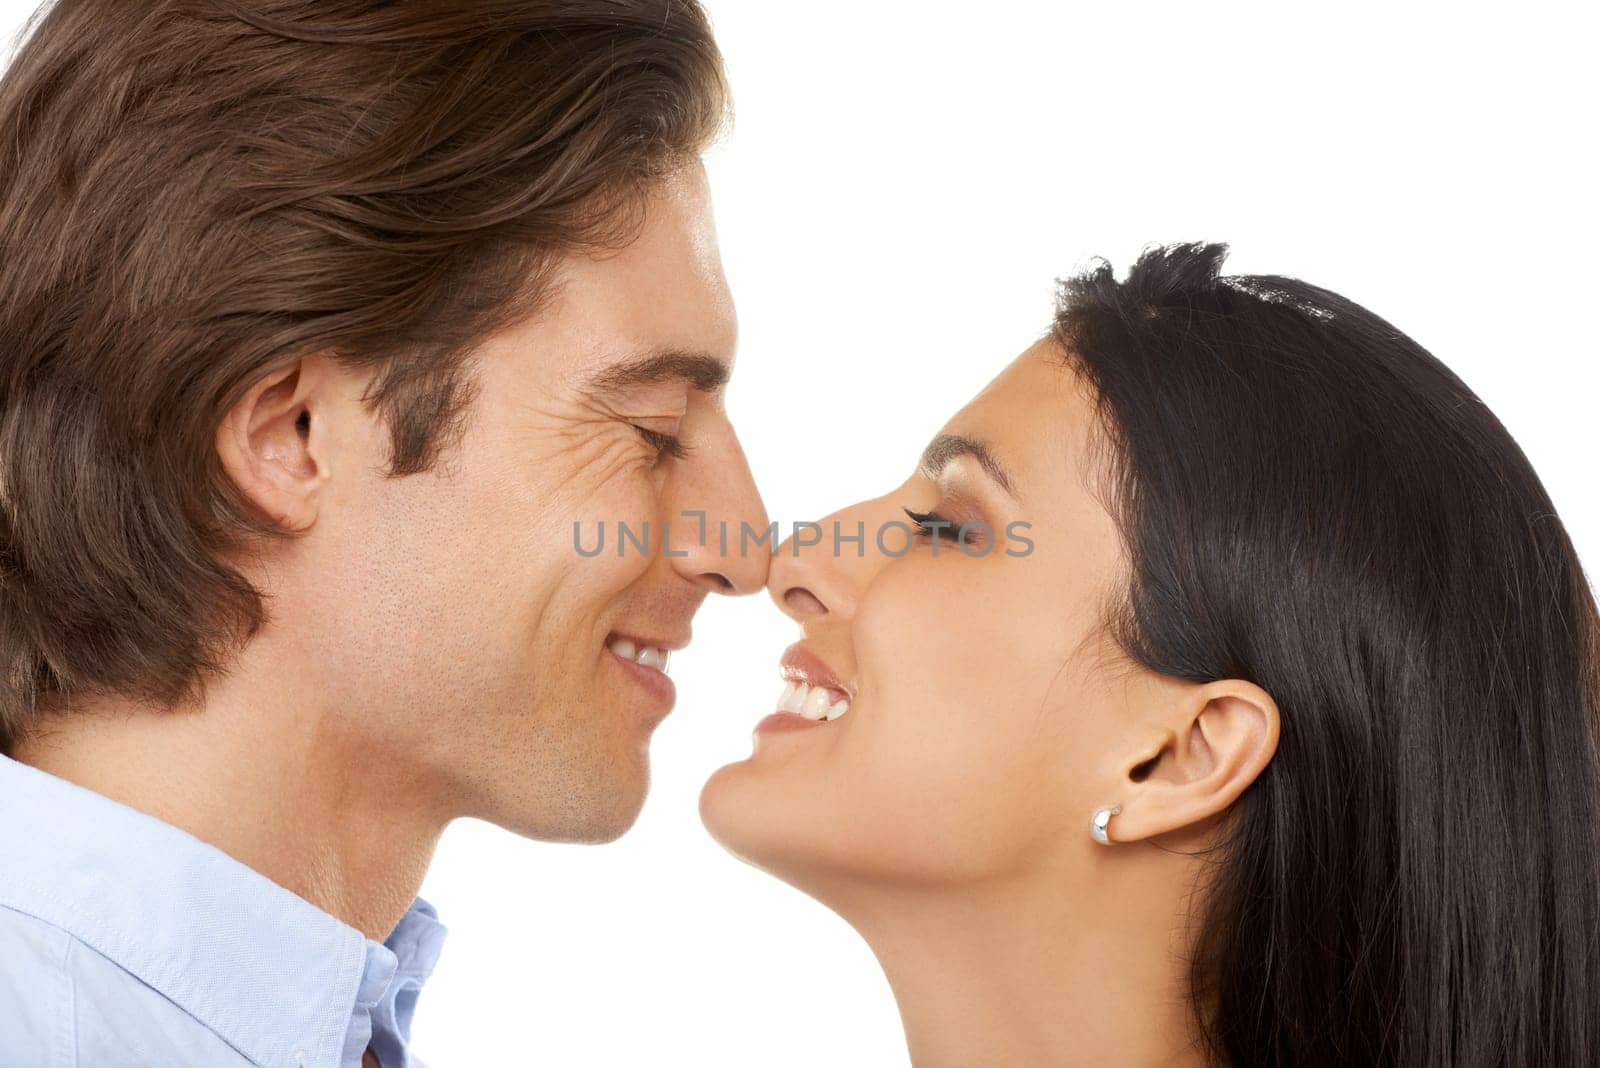 Couple, nose and smile for love or valentines day date in affection isolated against white studio background. Closeup of man and woman smiling touching faces in happiness for special month of romance.